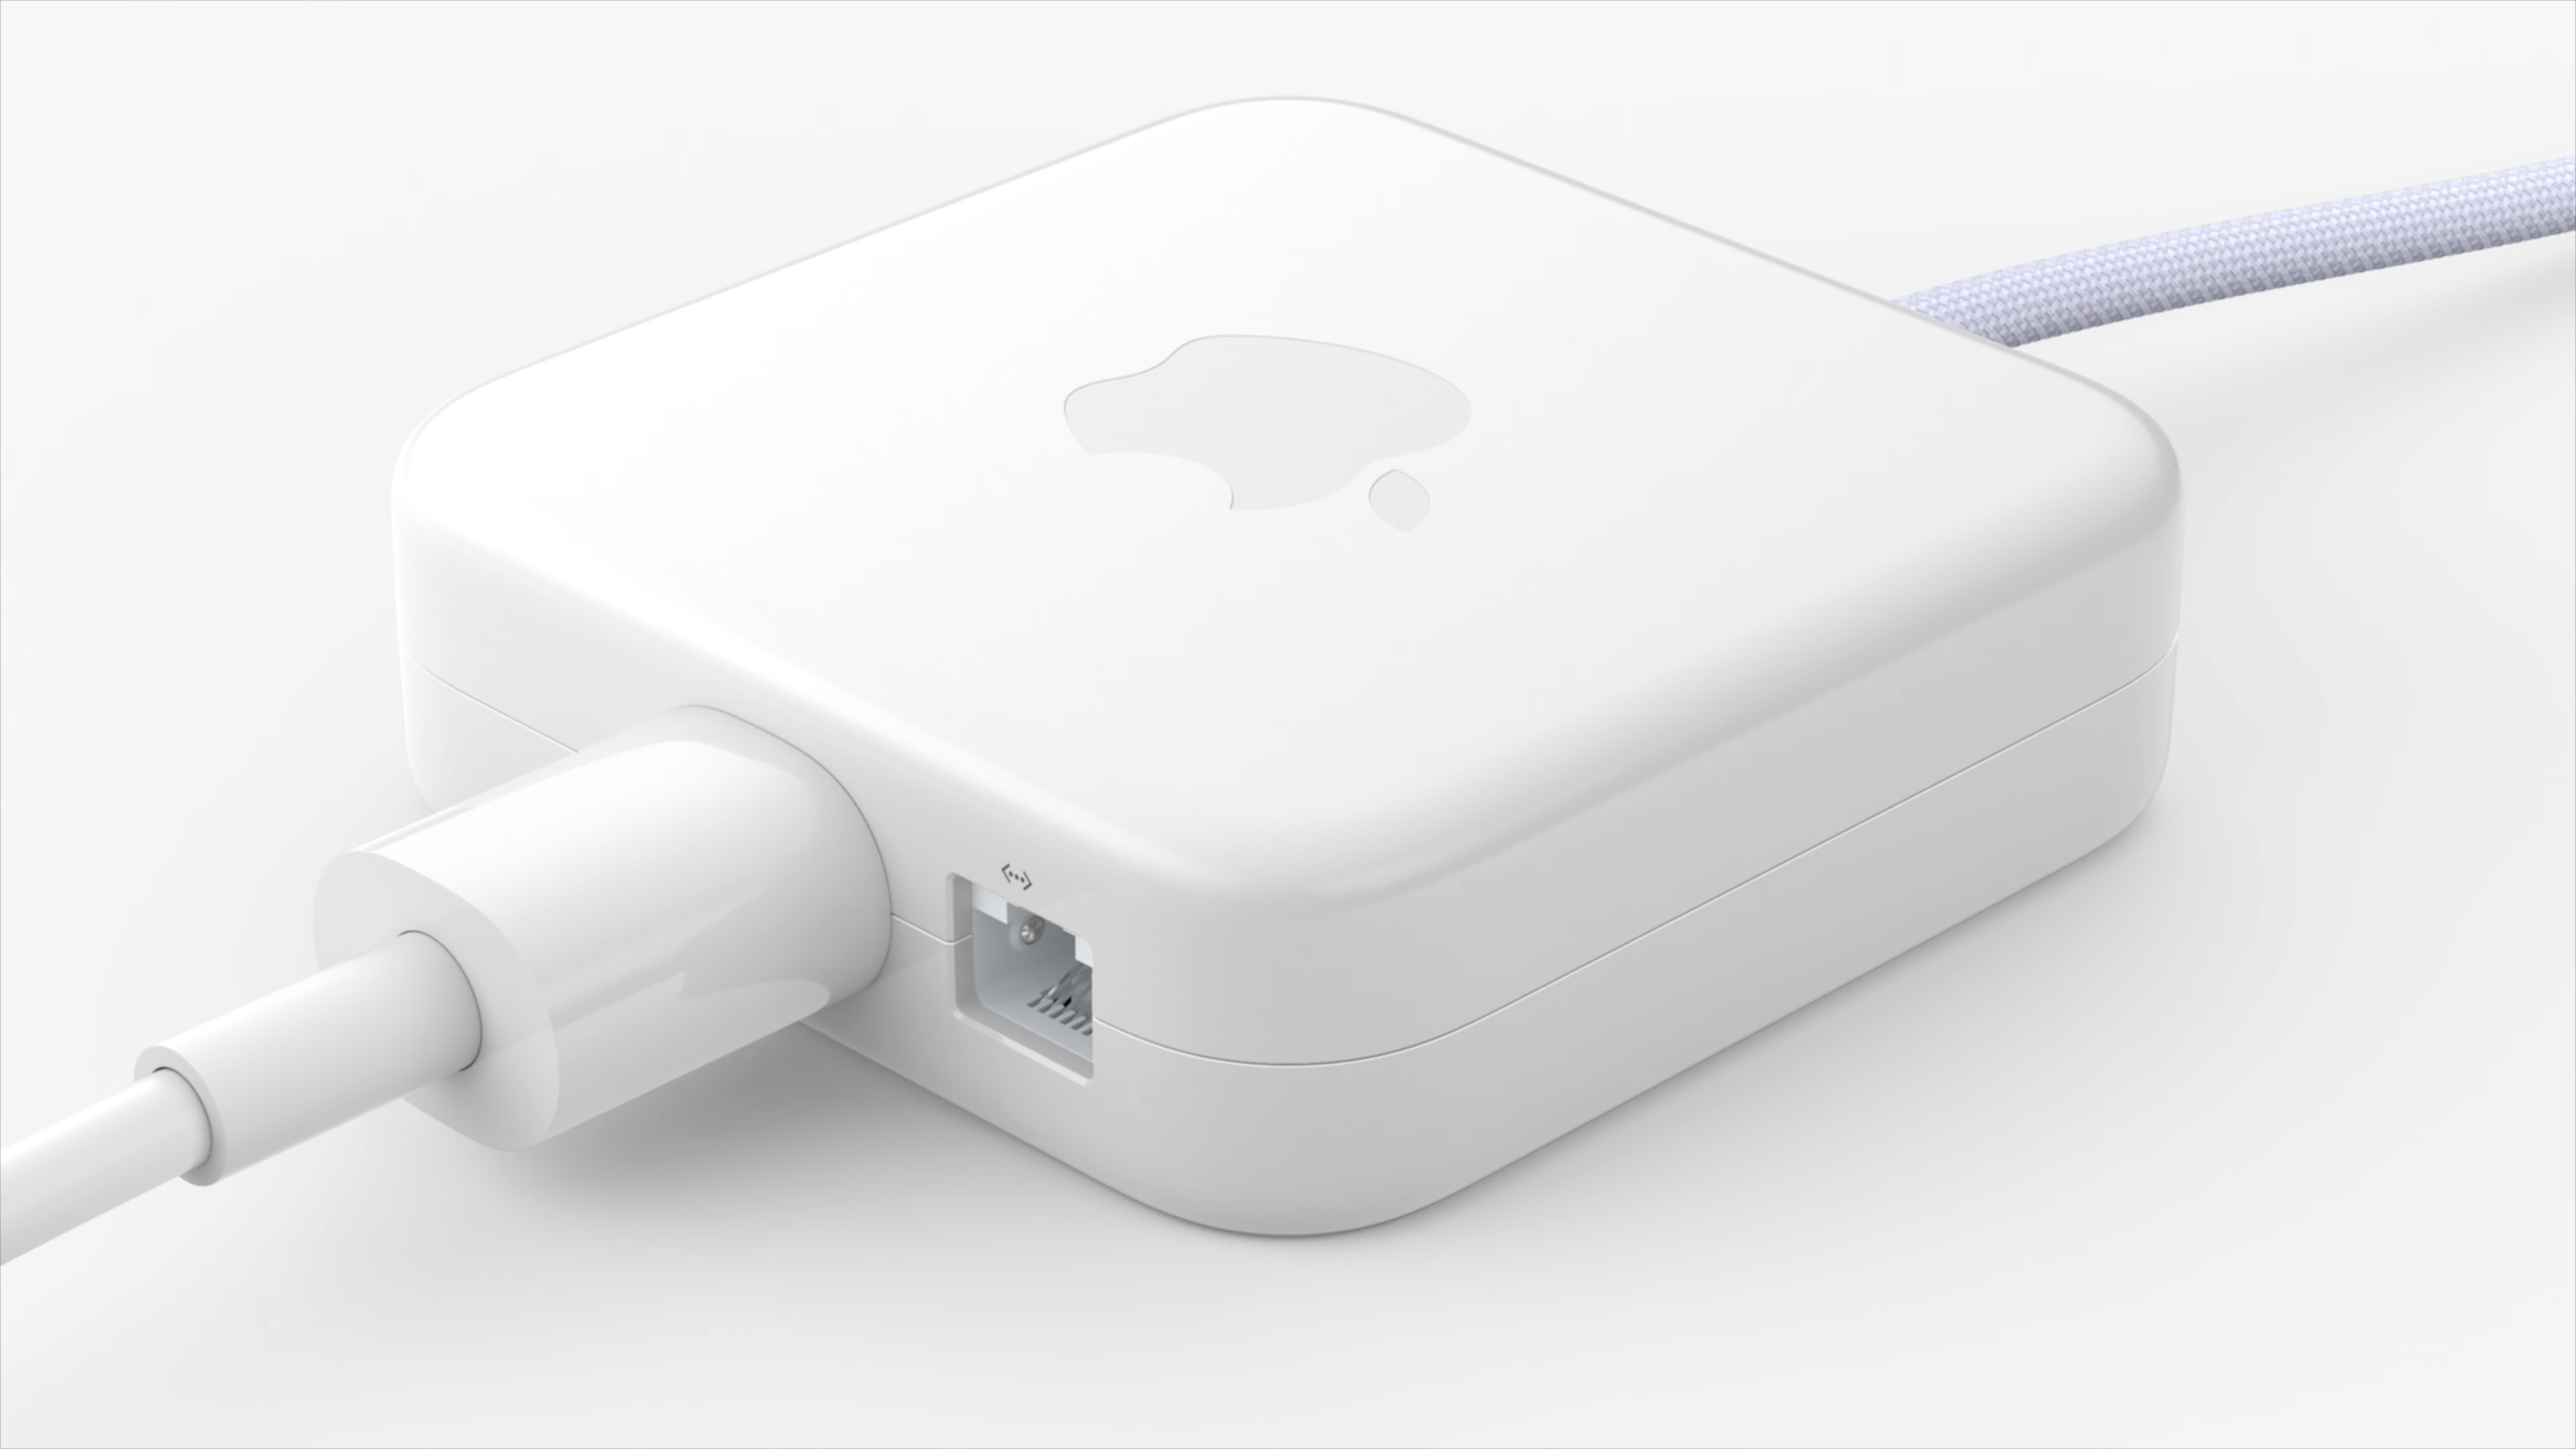 M1 iMac's new power brick with integrated ethernet